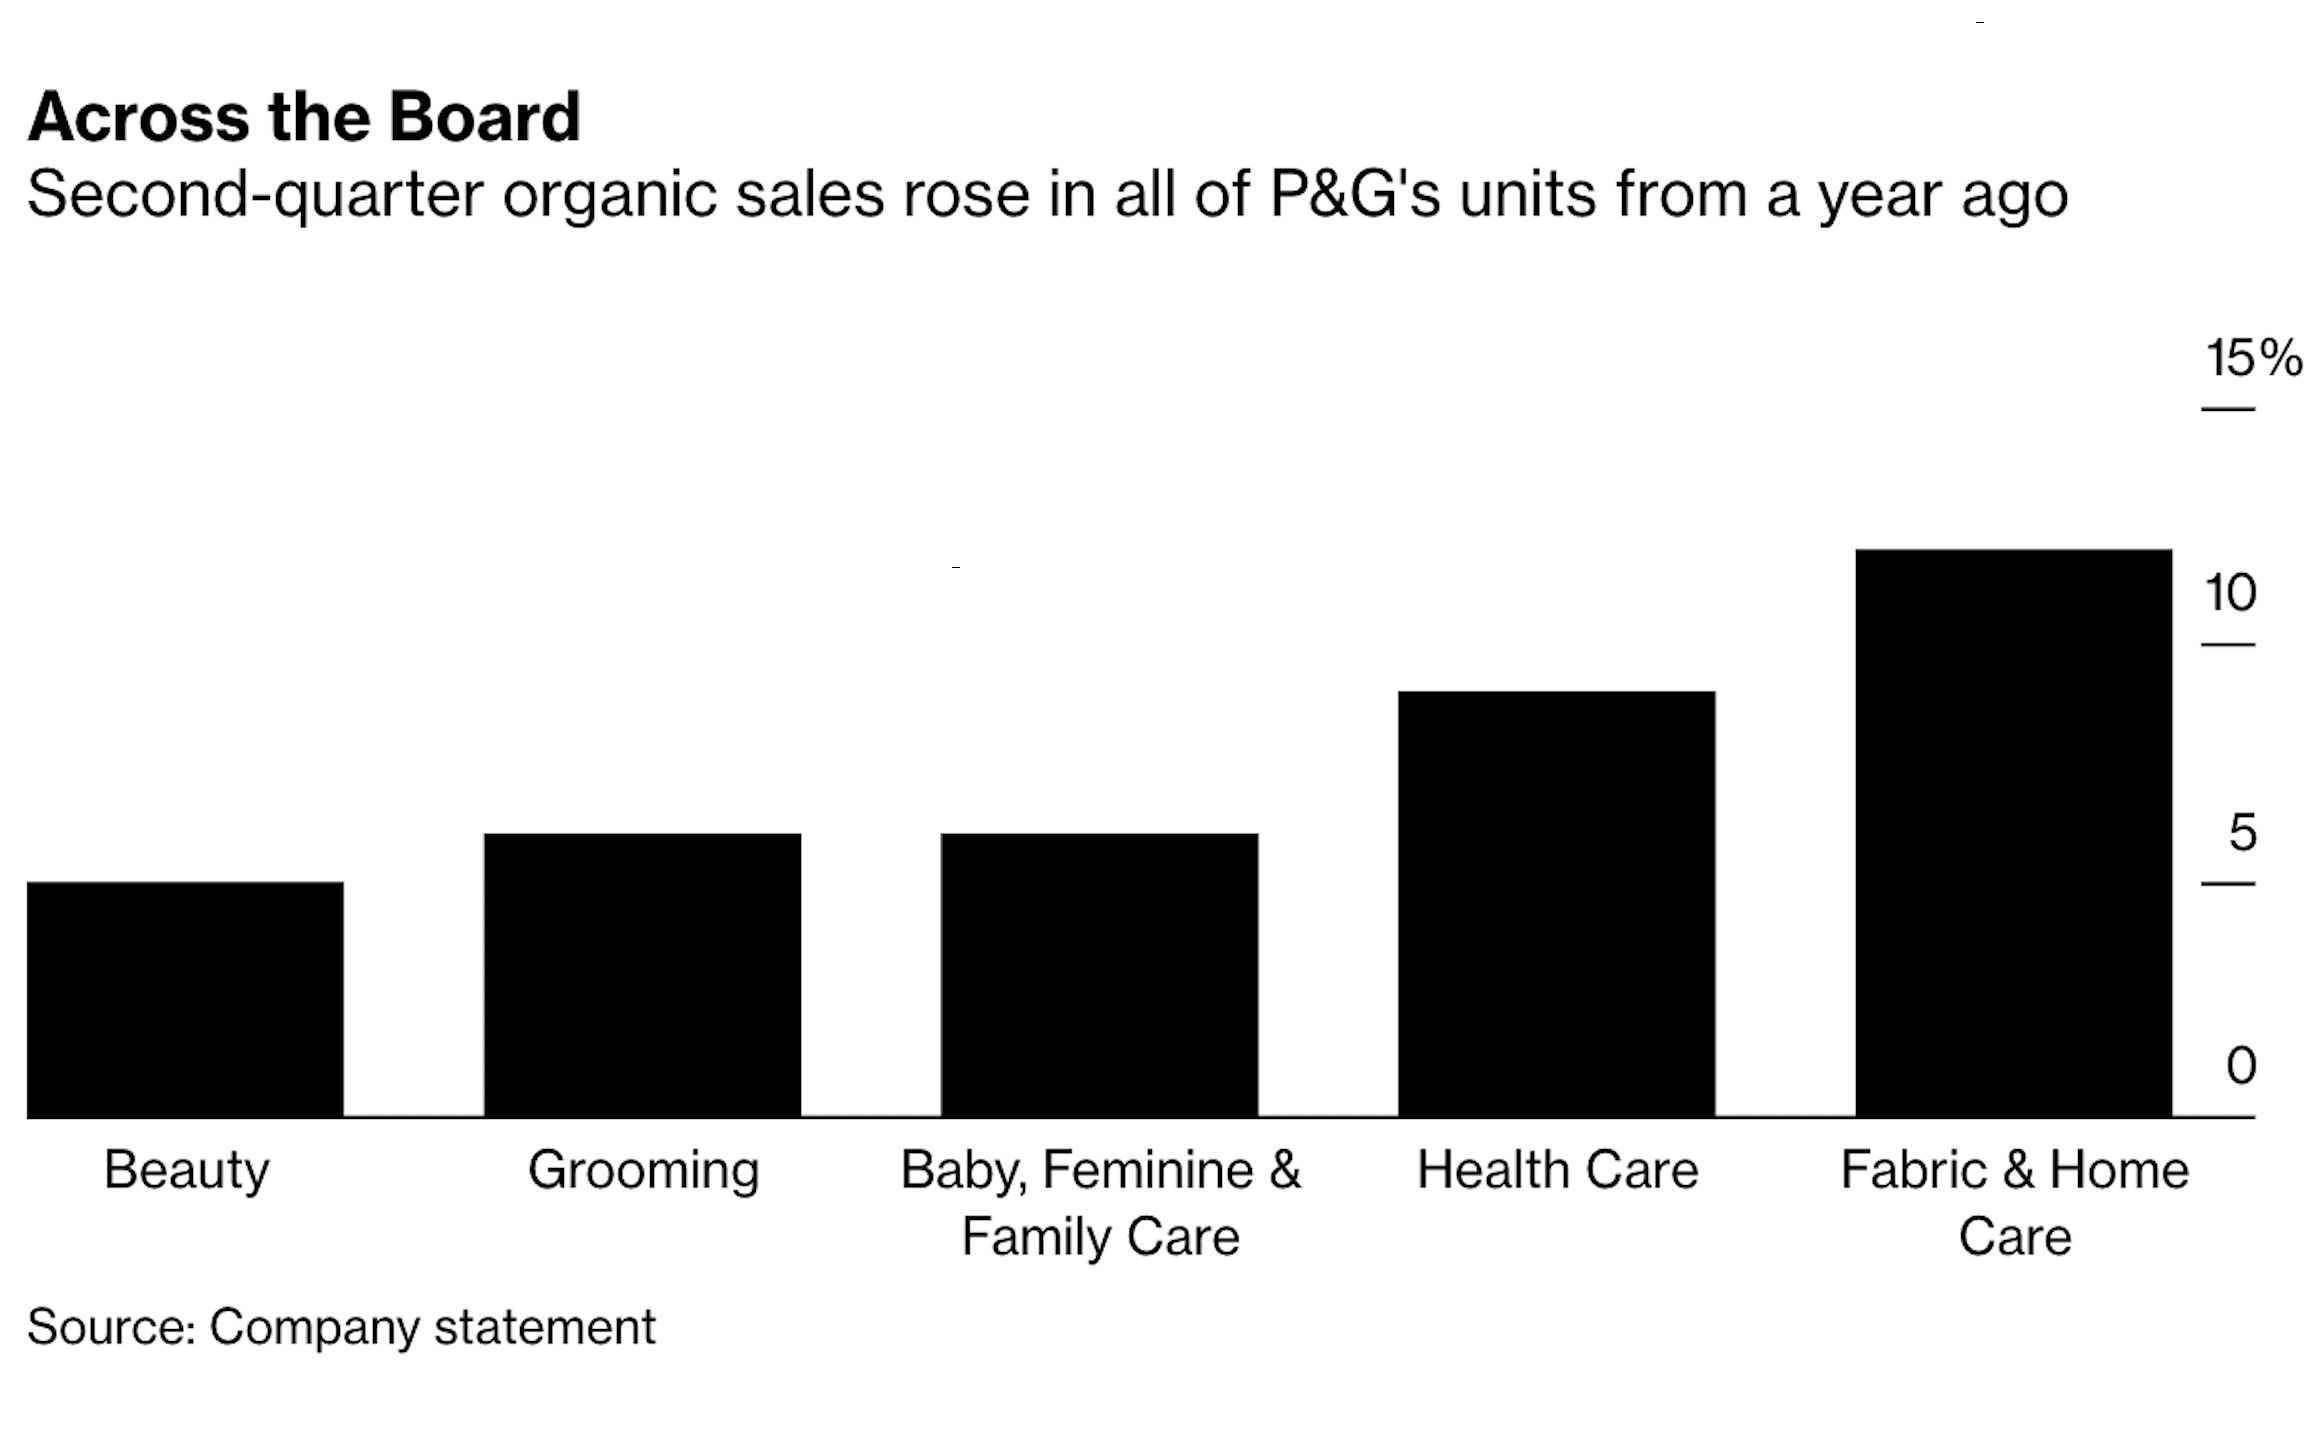 Second-quarter organic sales rose in all of P&G's units from a year ago